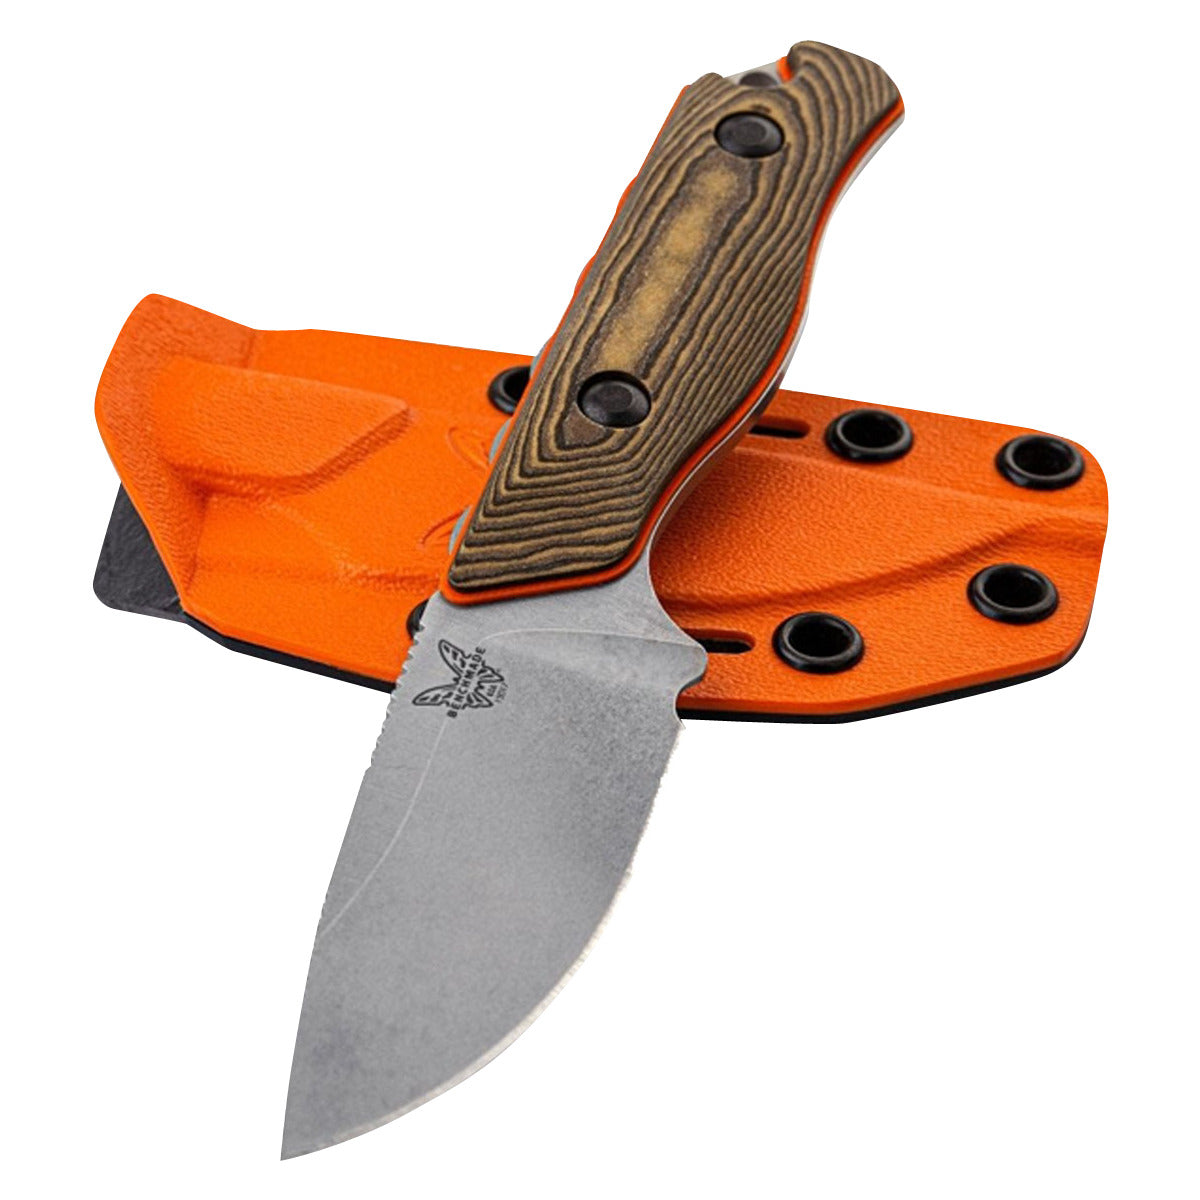 Benchmade 15017-1 Hidden Canyon Hunter in  by GOHUNT | Benchmade - GOHUNT Shop